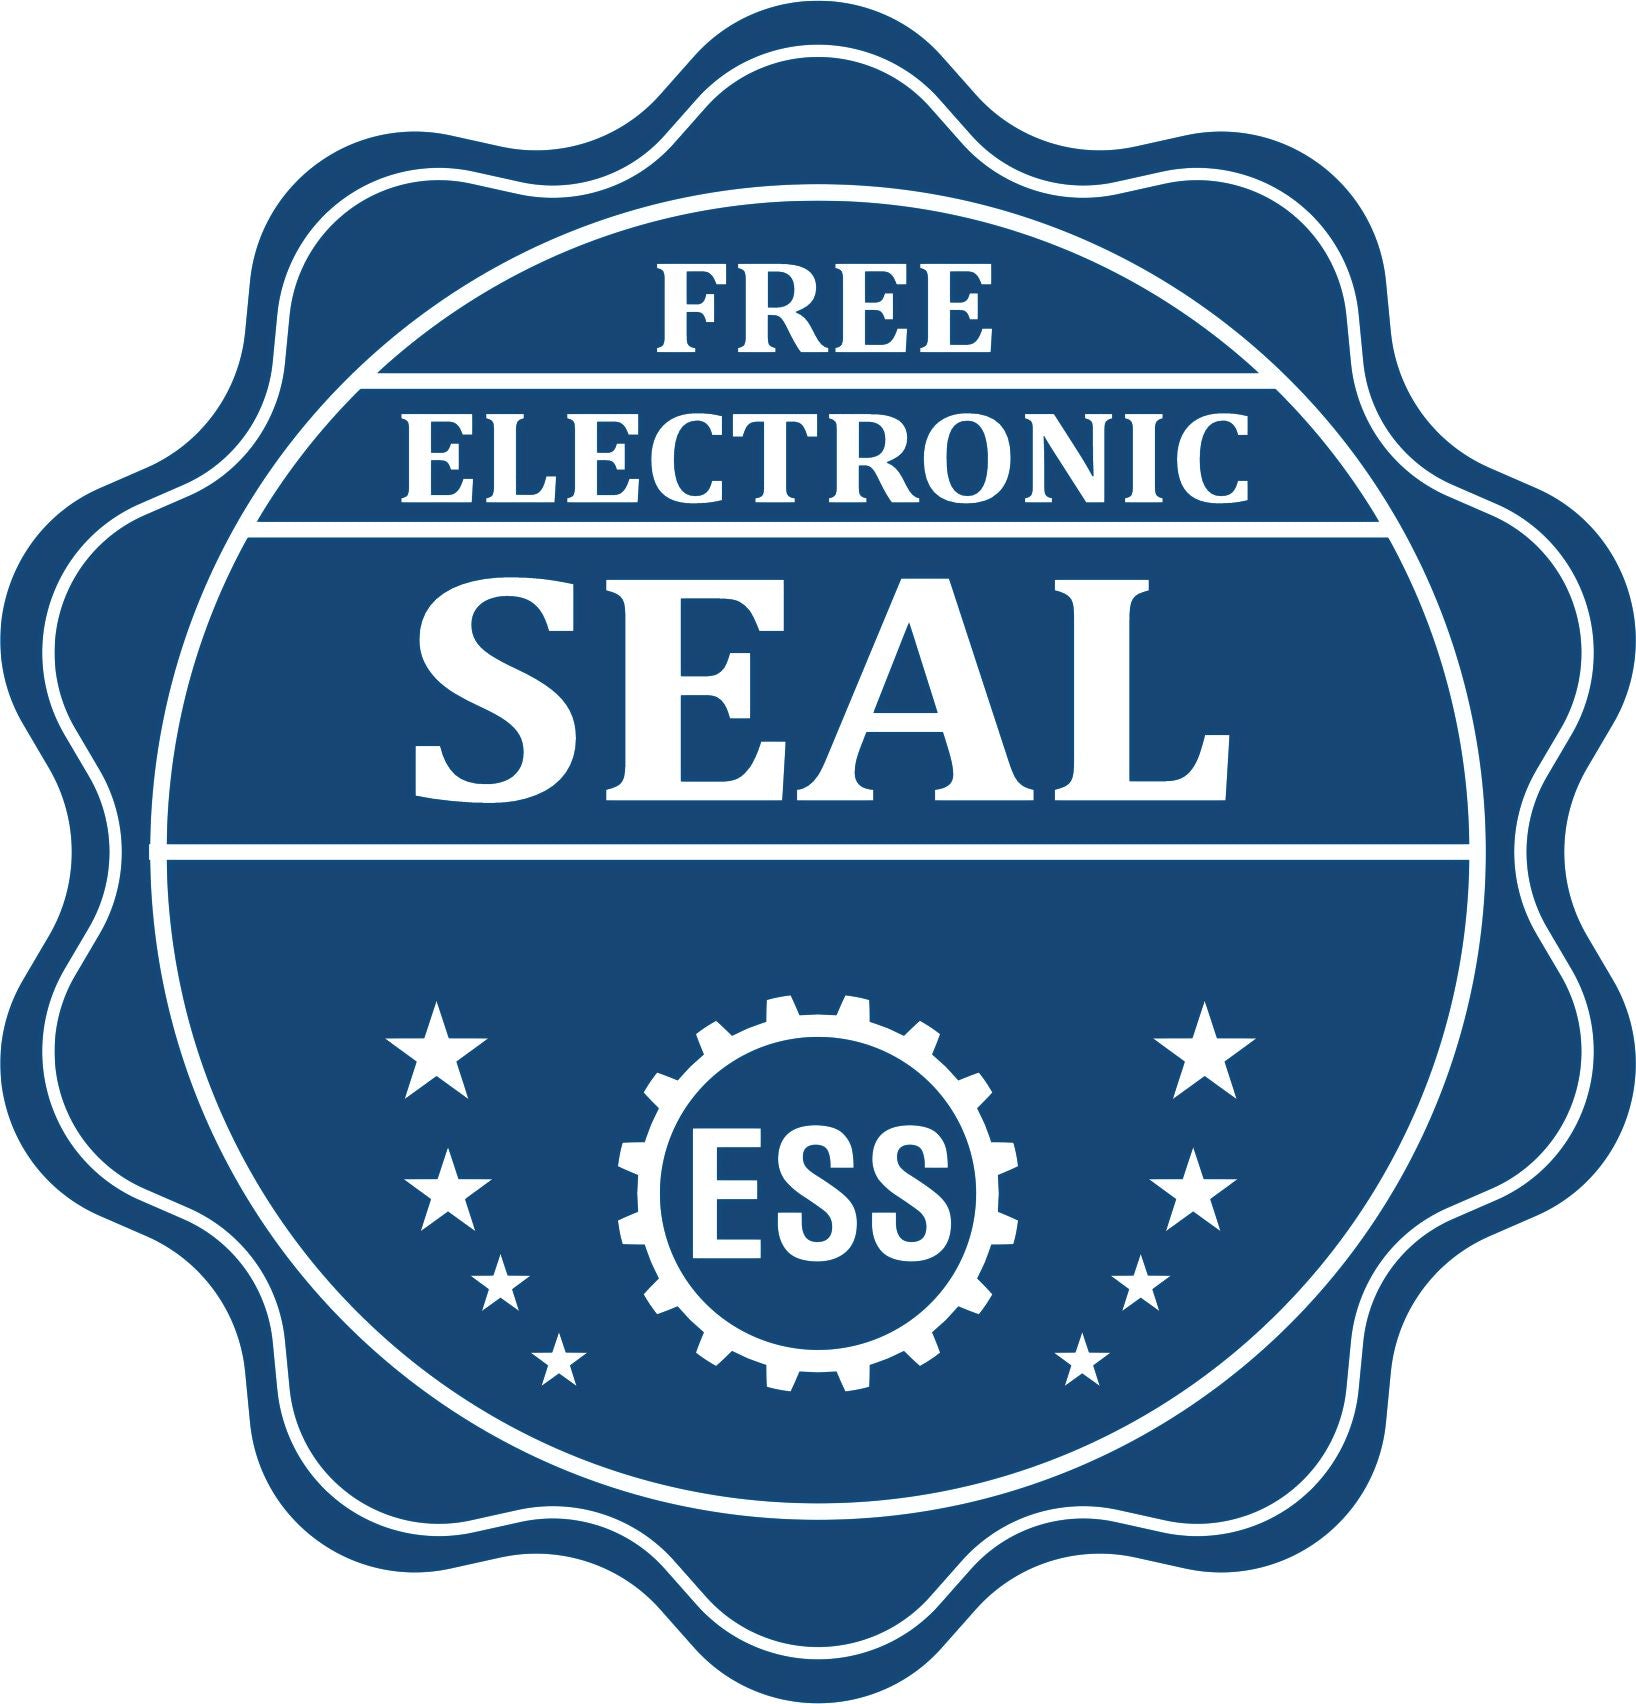 A badge showing a free electronic seal for the Long Reach Kentucky Land Surveyor Seal with stars and the ESS gear on the emblem.